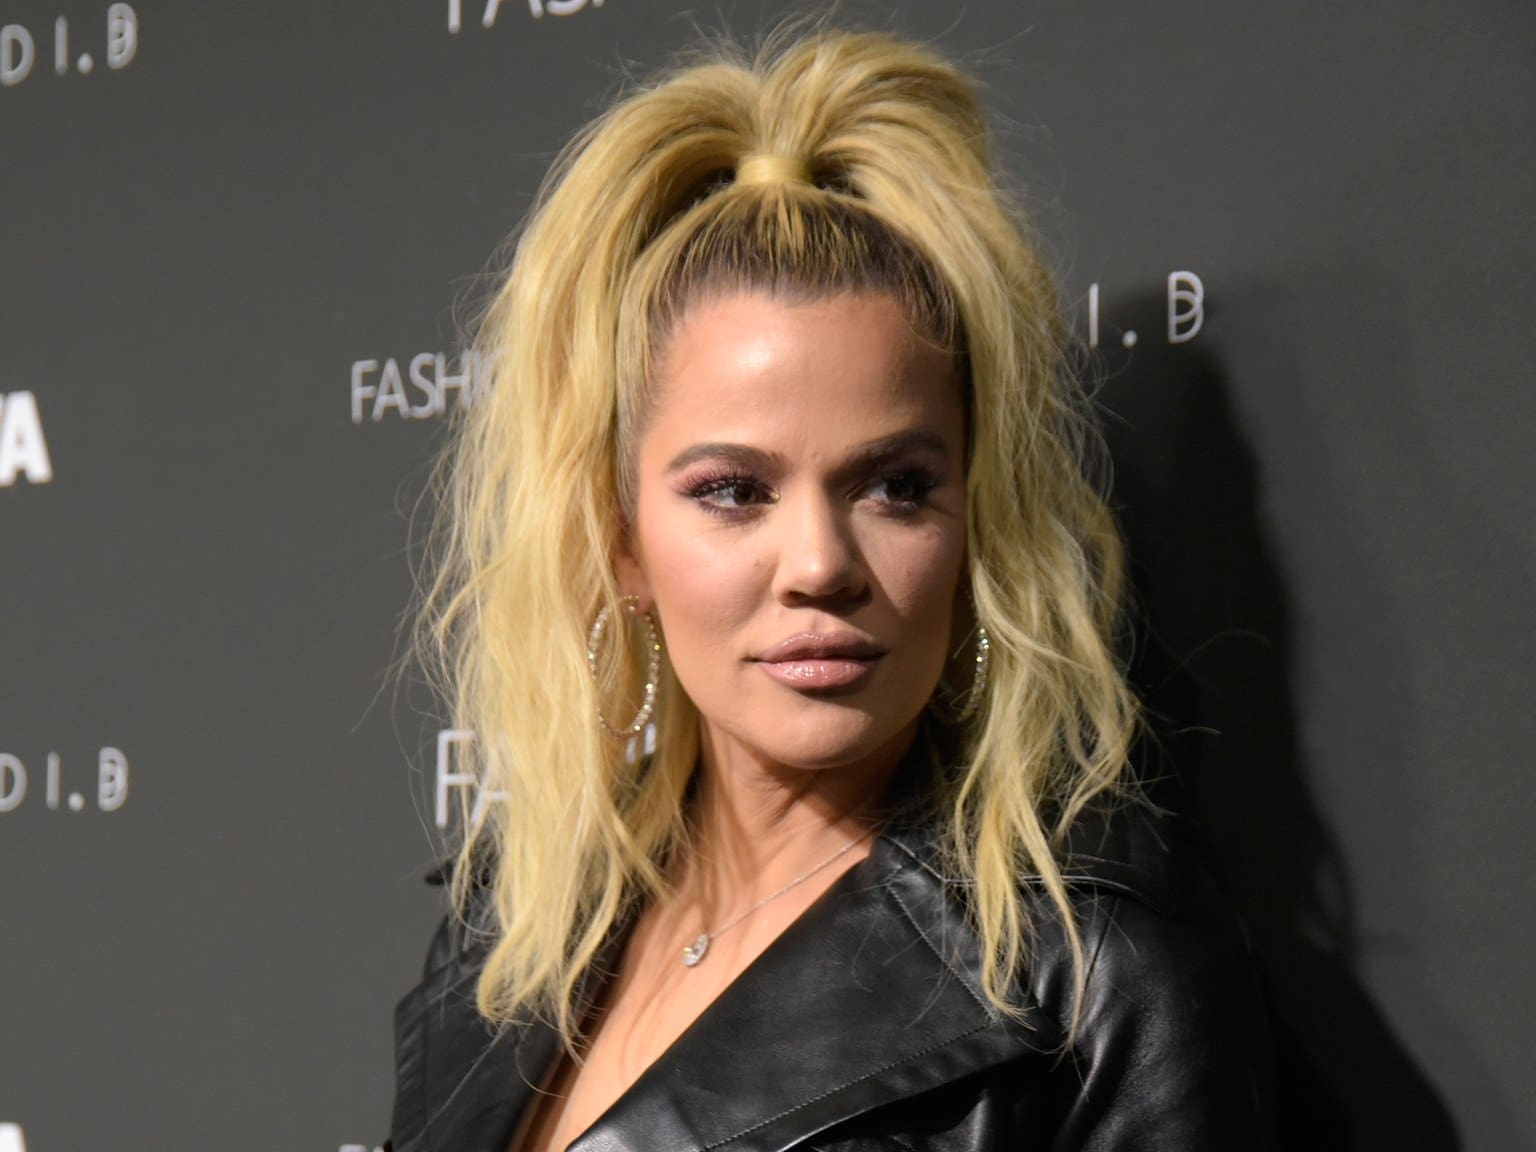 Khloe Kardashian Sparks Nose Job Rumors Following A New Podcast - See The Before And After Images